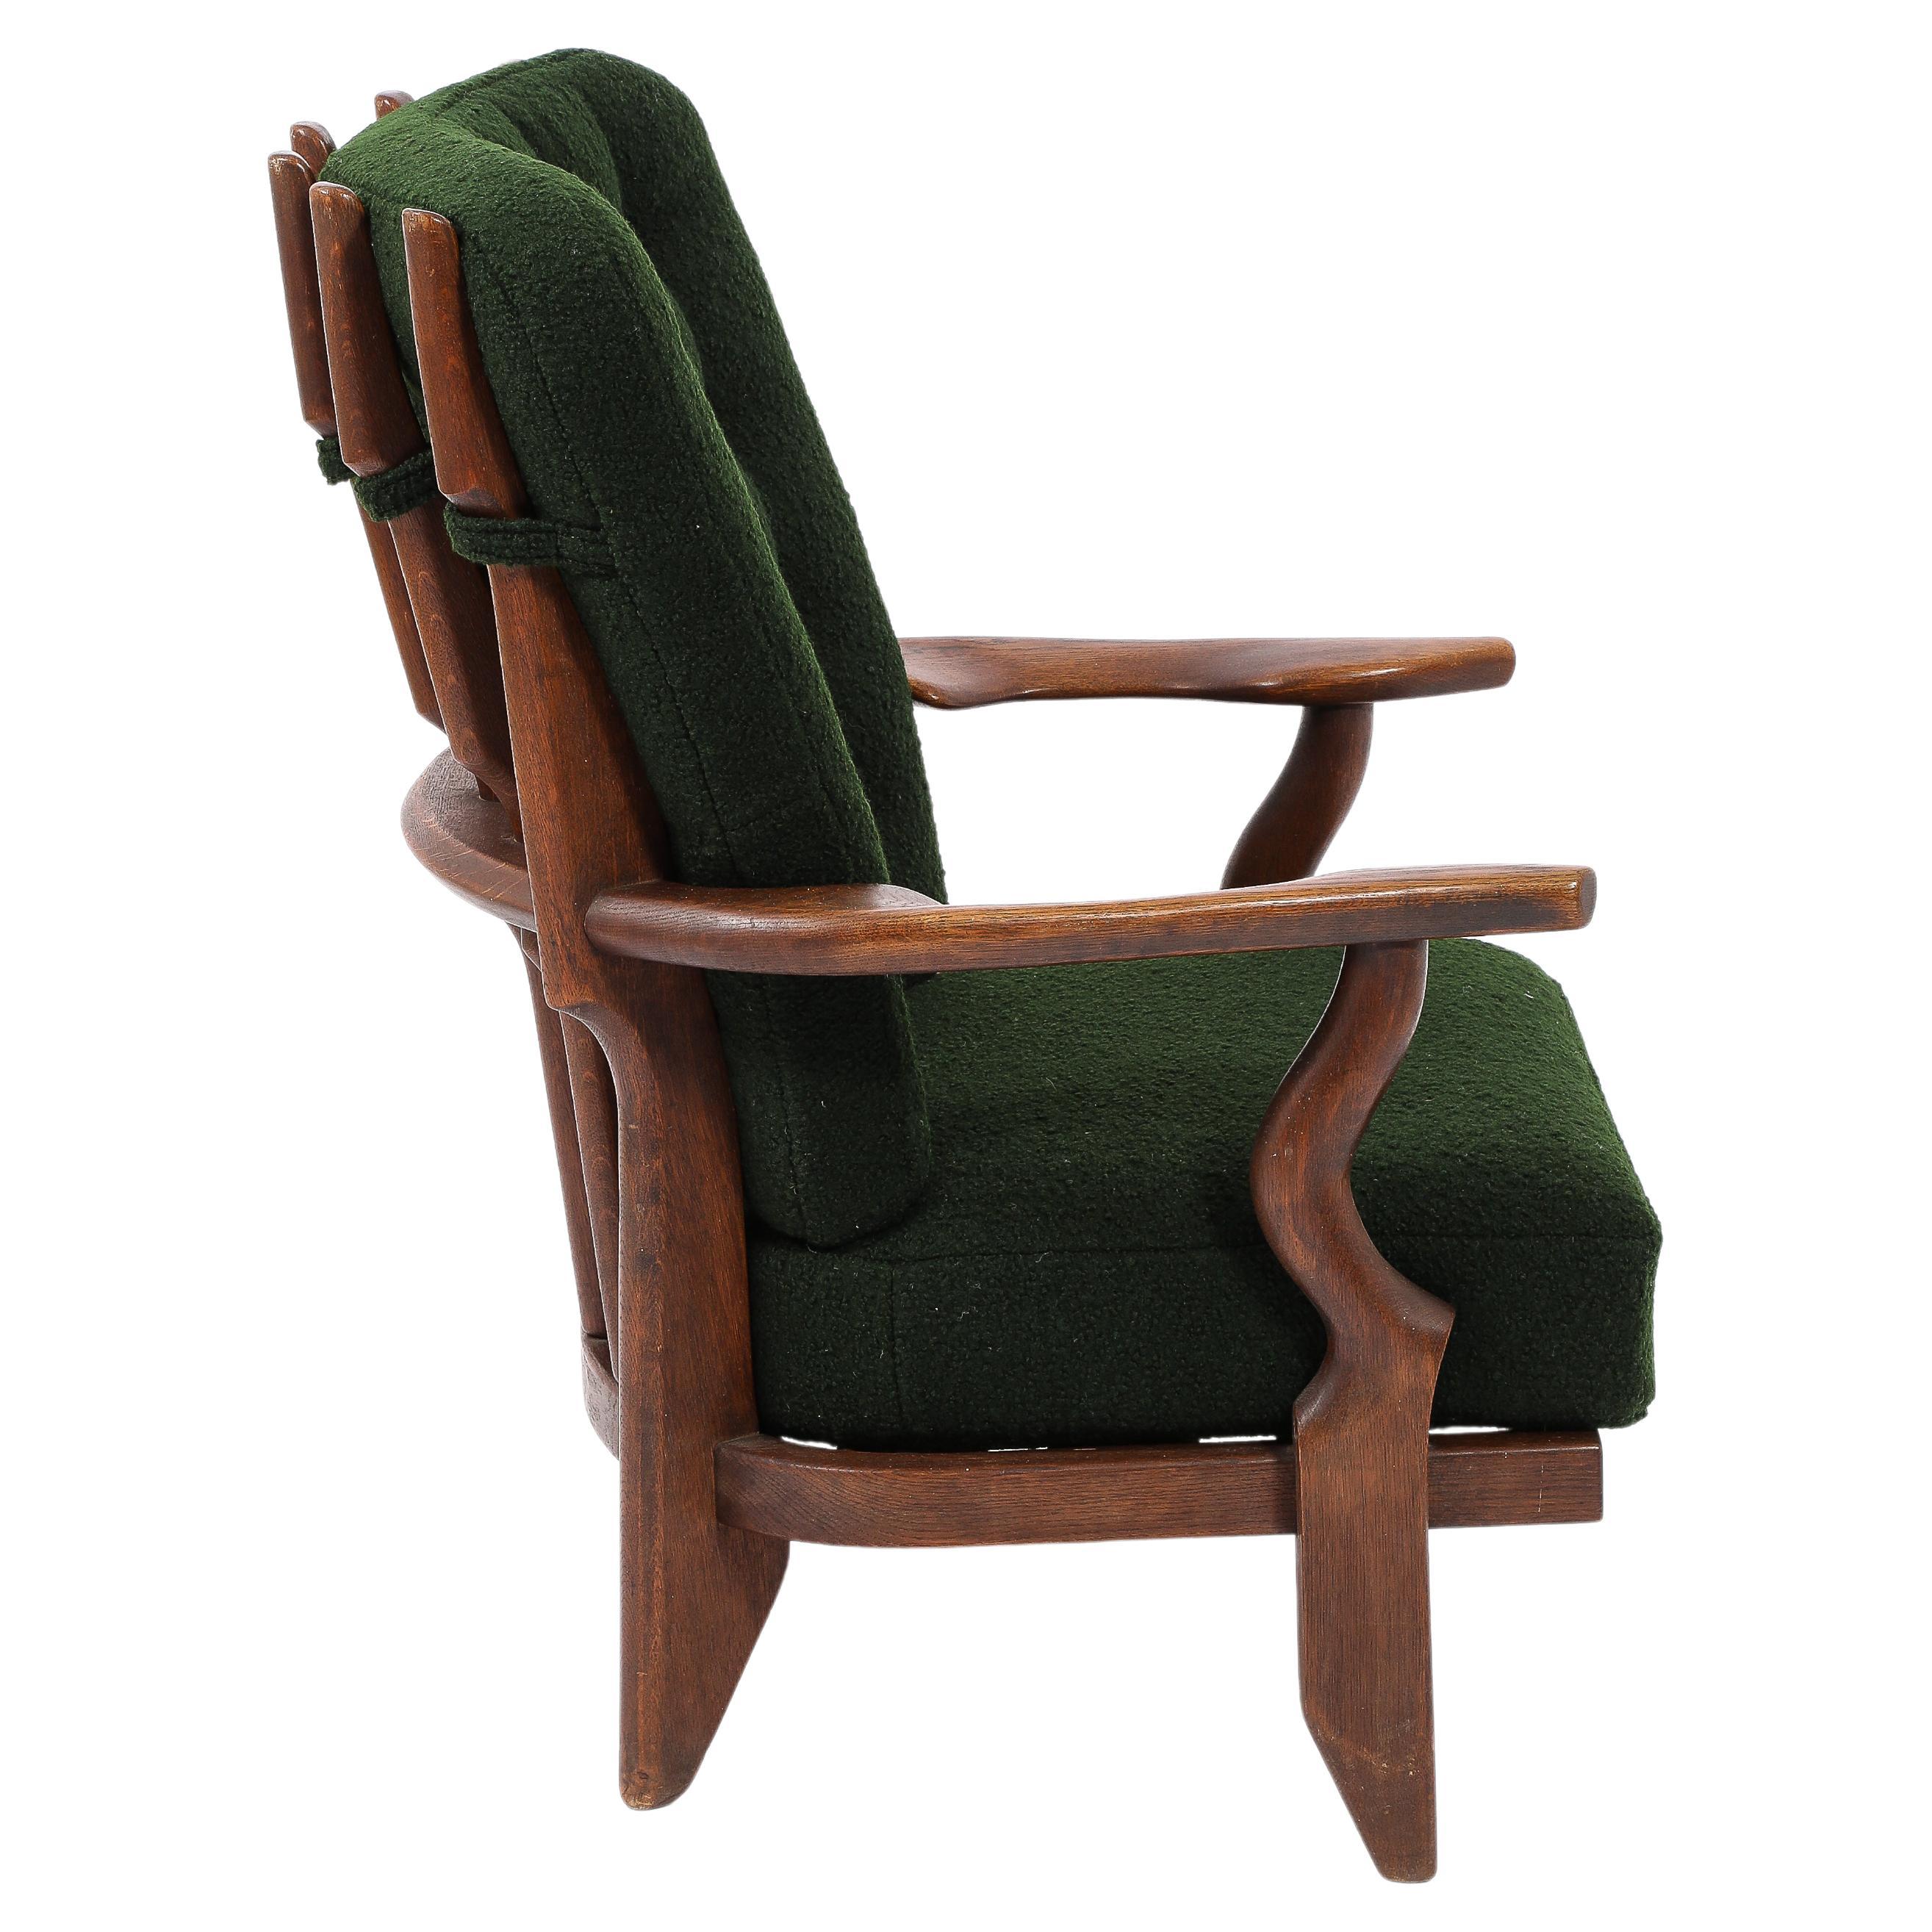 Guillerme & Chambron Petit Repos Armchair in Green Bouclé, France 1950's For Sale